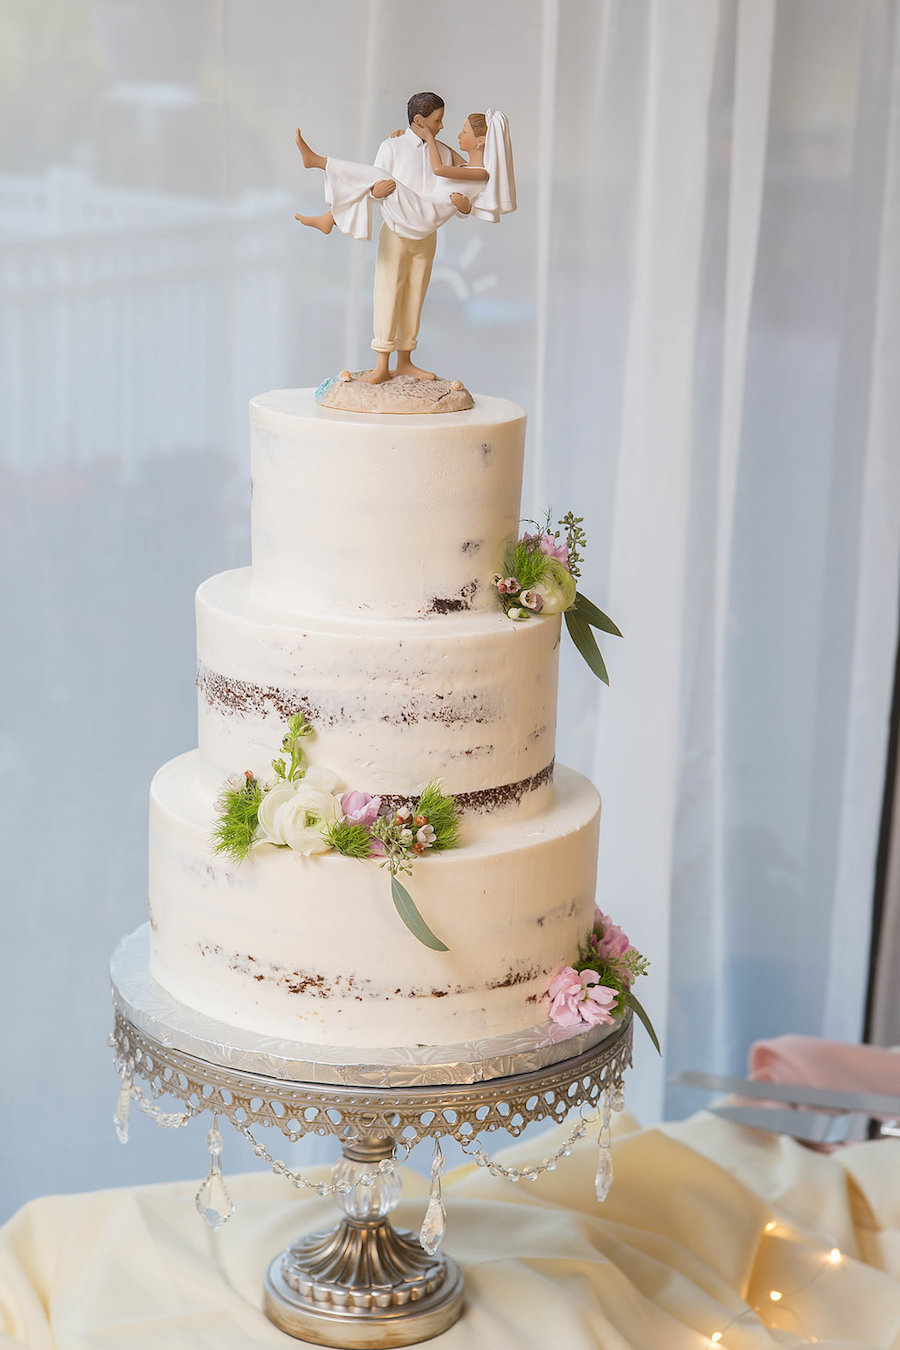 Semi-Naked Three Tier Round Natural Rustic Wedding Cake with Beach Inspired Florals and Playful Beach Wedding Bride and Groom Figurine Cake Topper on Silver Jeweled Cake Stand | Tampa Bay Wedding Bakery The Artistic Whisk